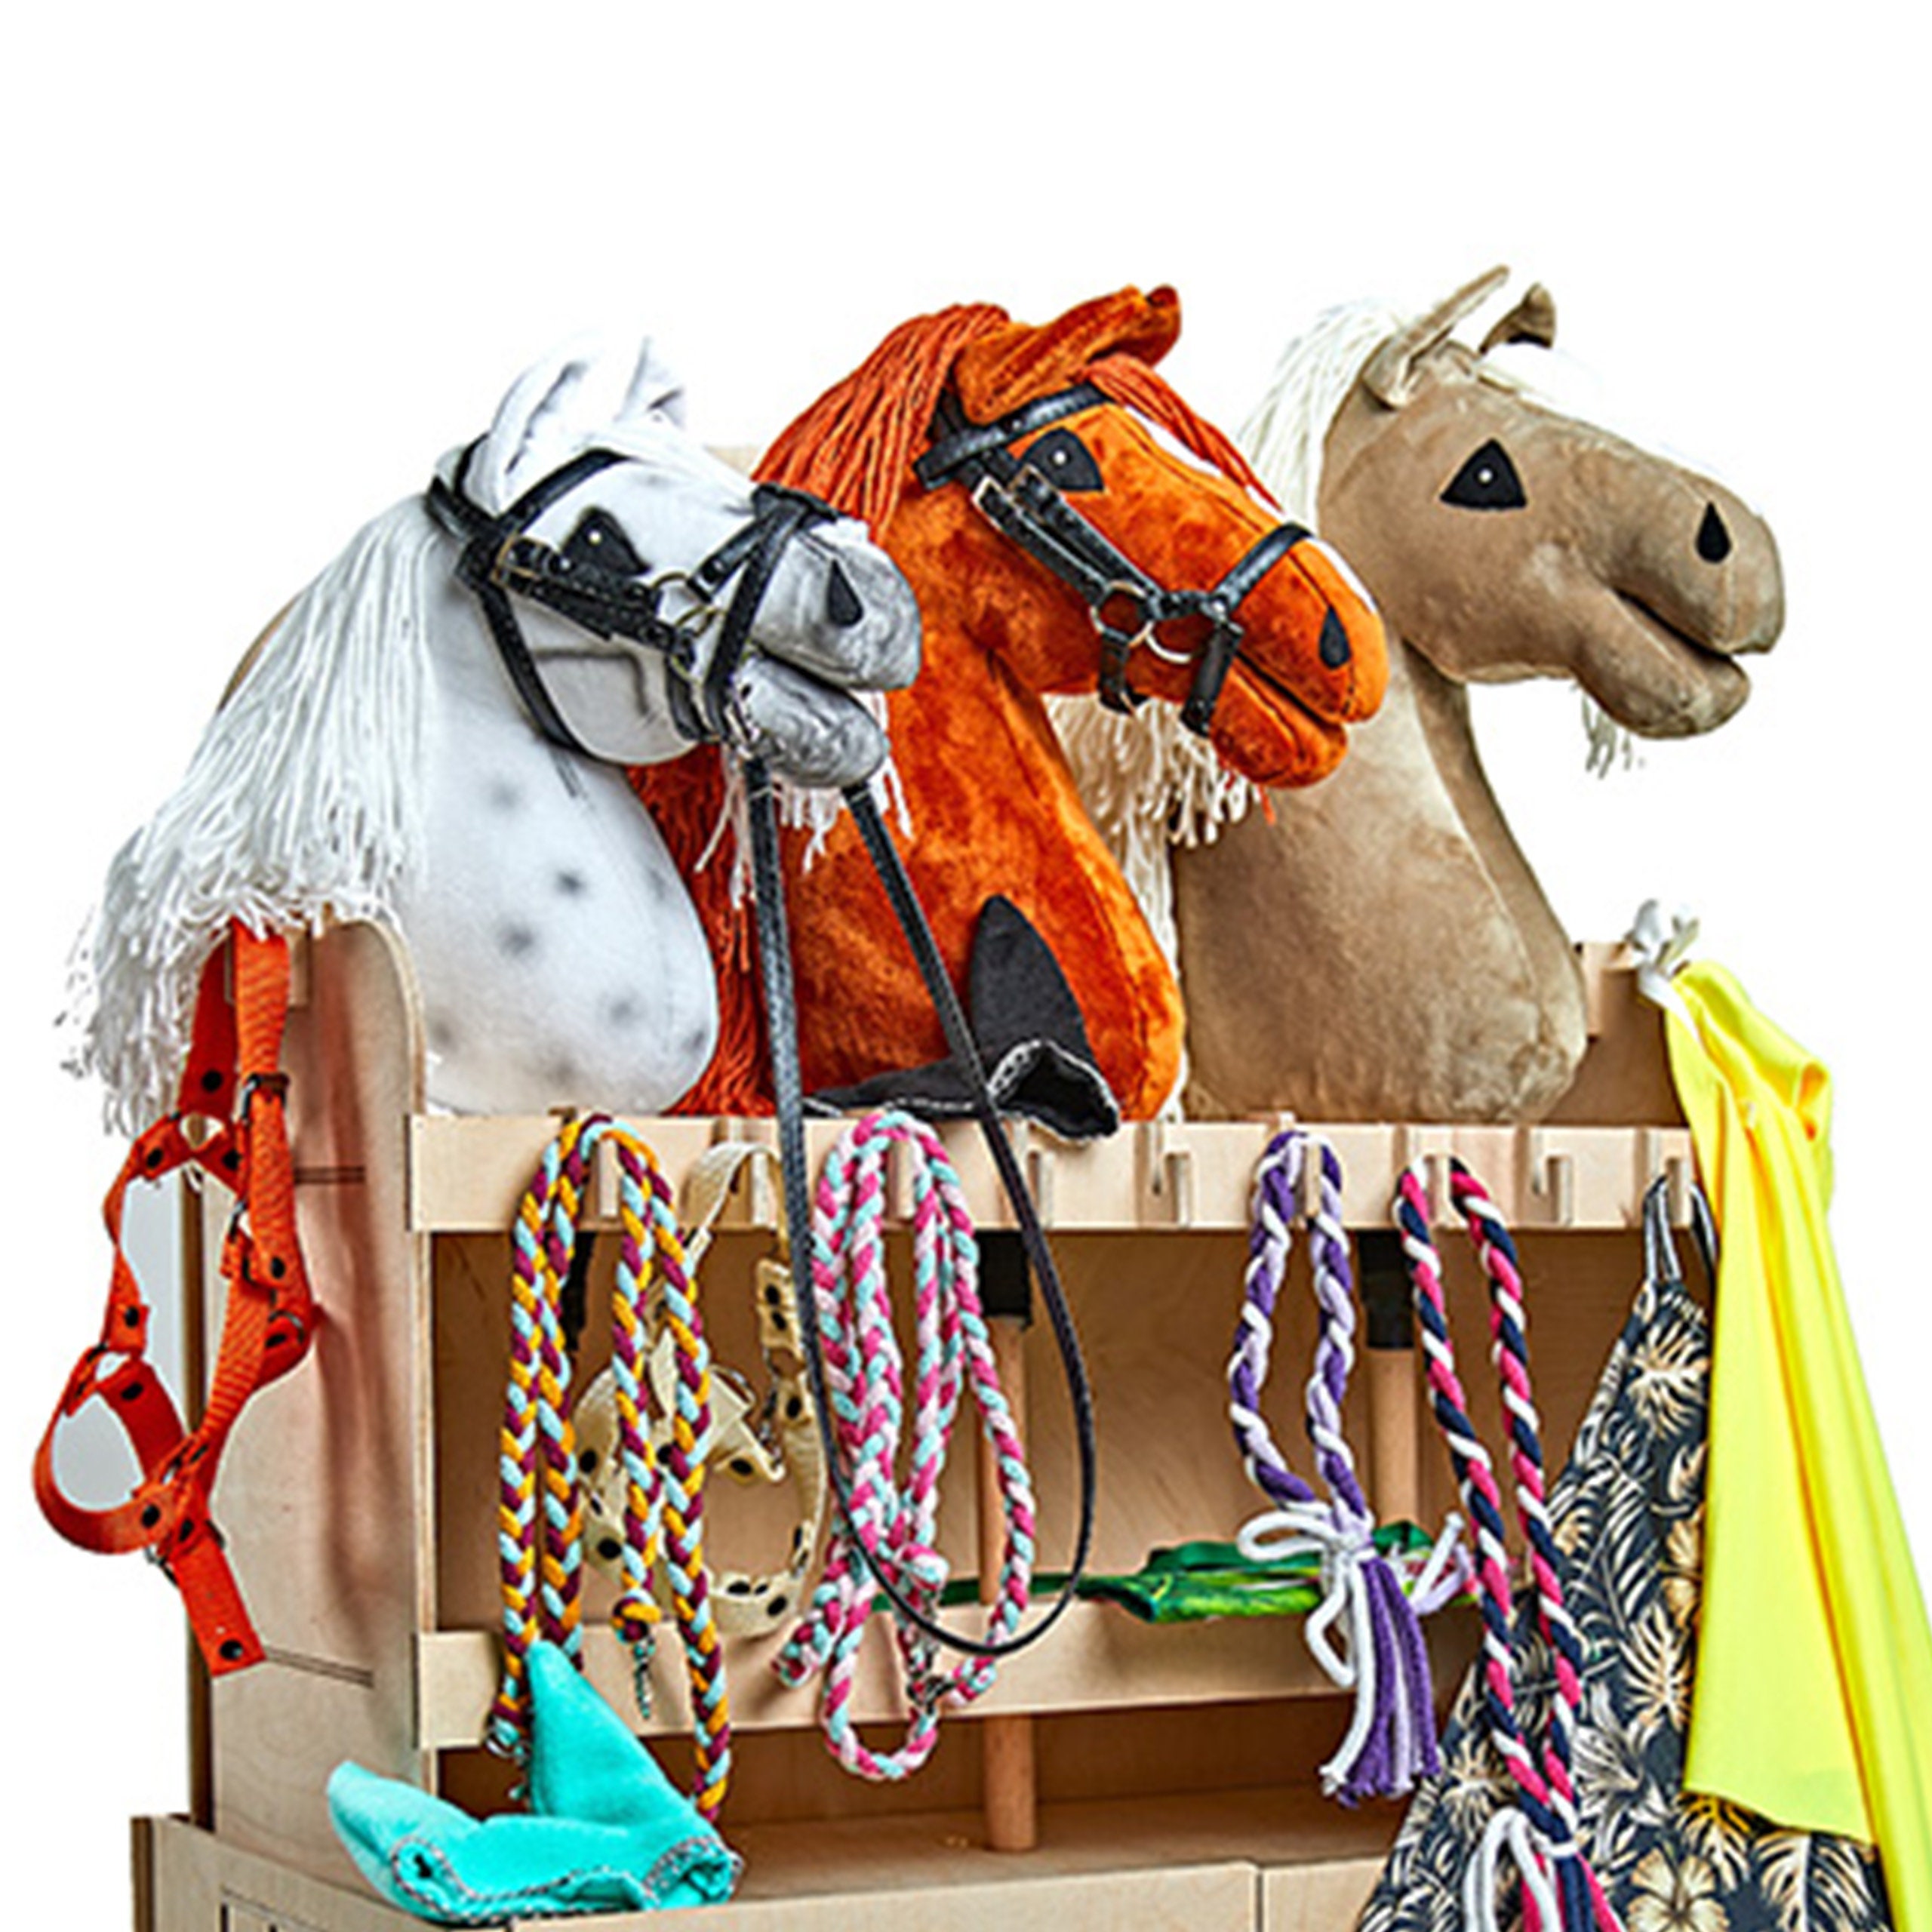 Home Page  Hobby horse, Hobby horses, Horse crafts